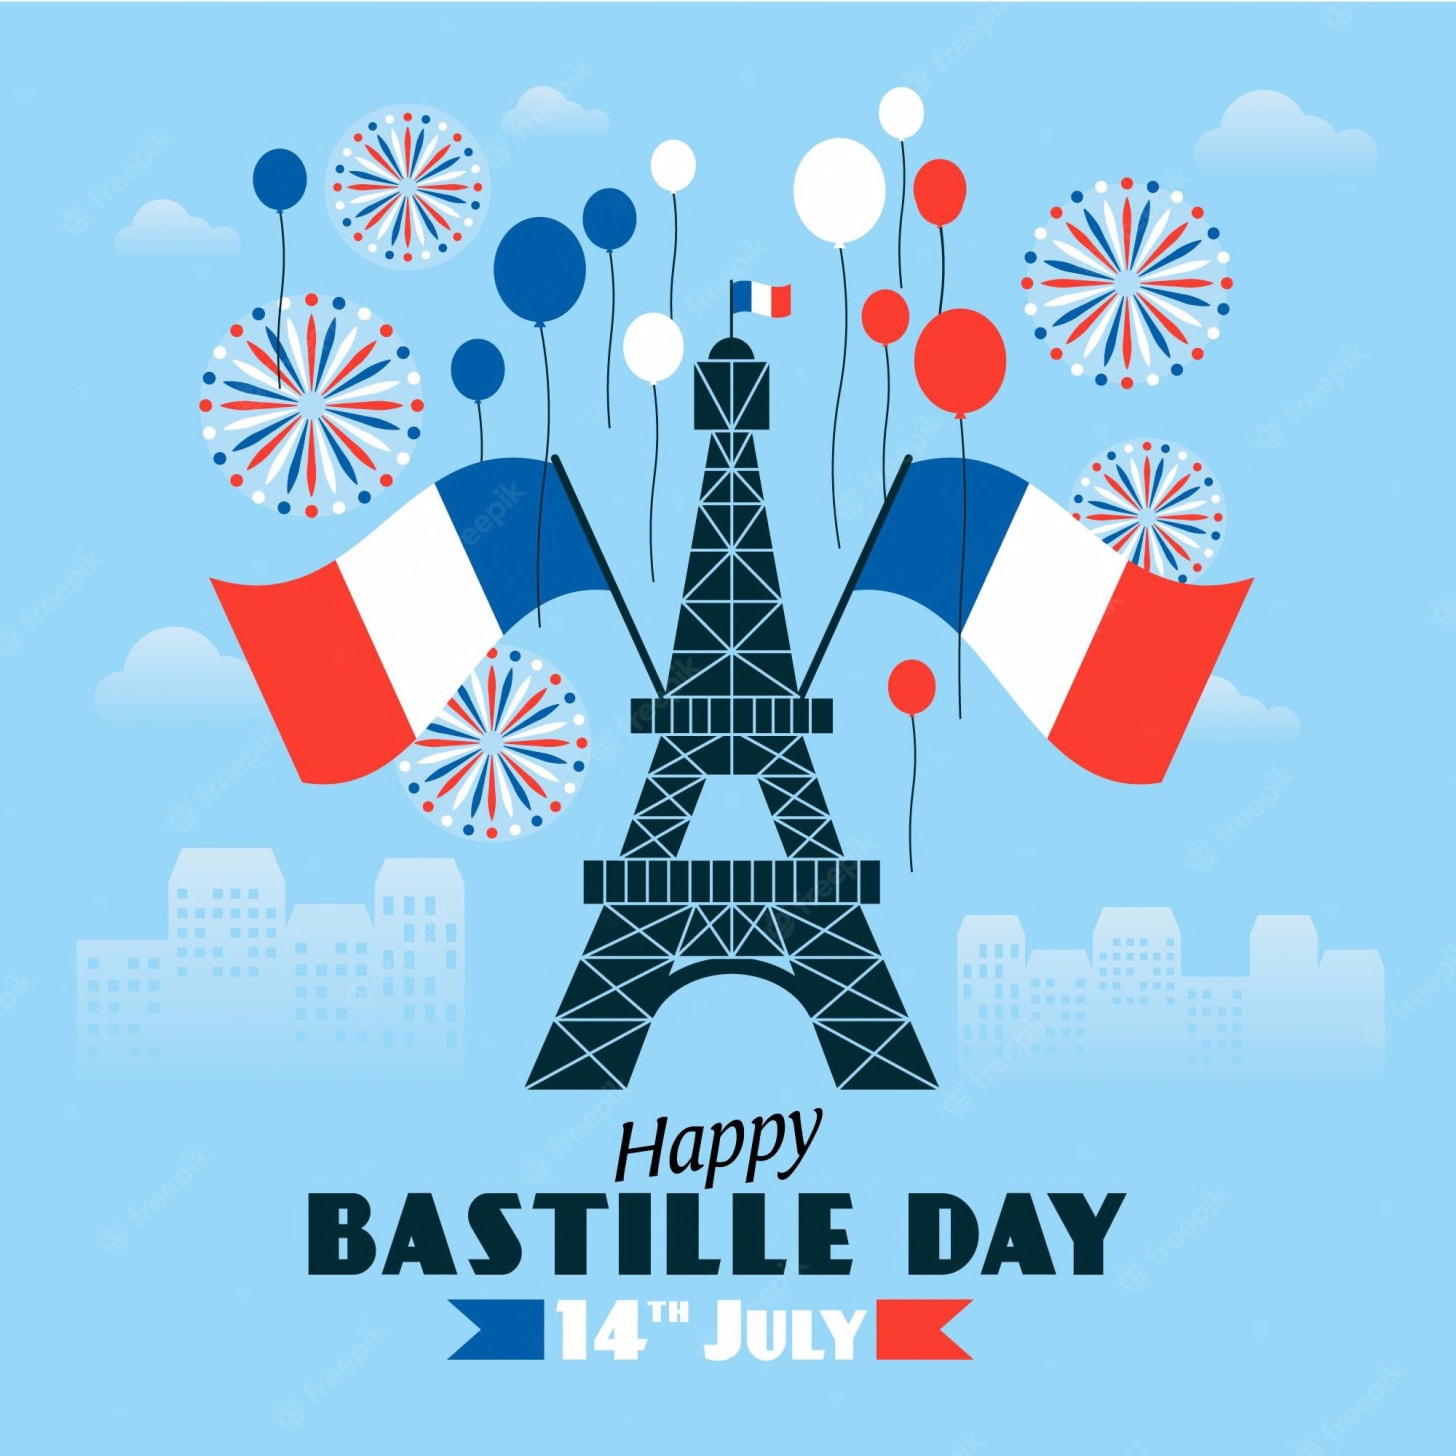 Bastille Day Images | Free Vectors, Stock Photos & PSD